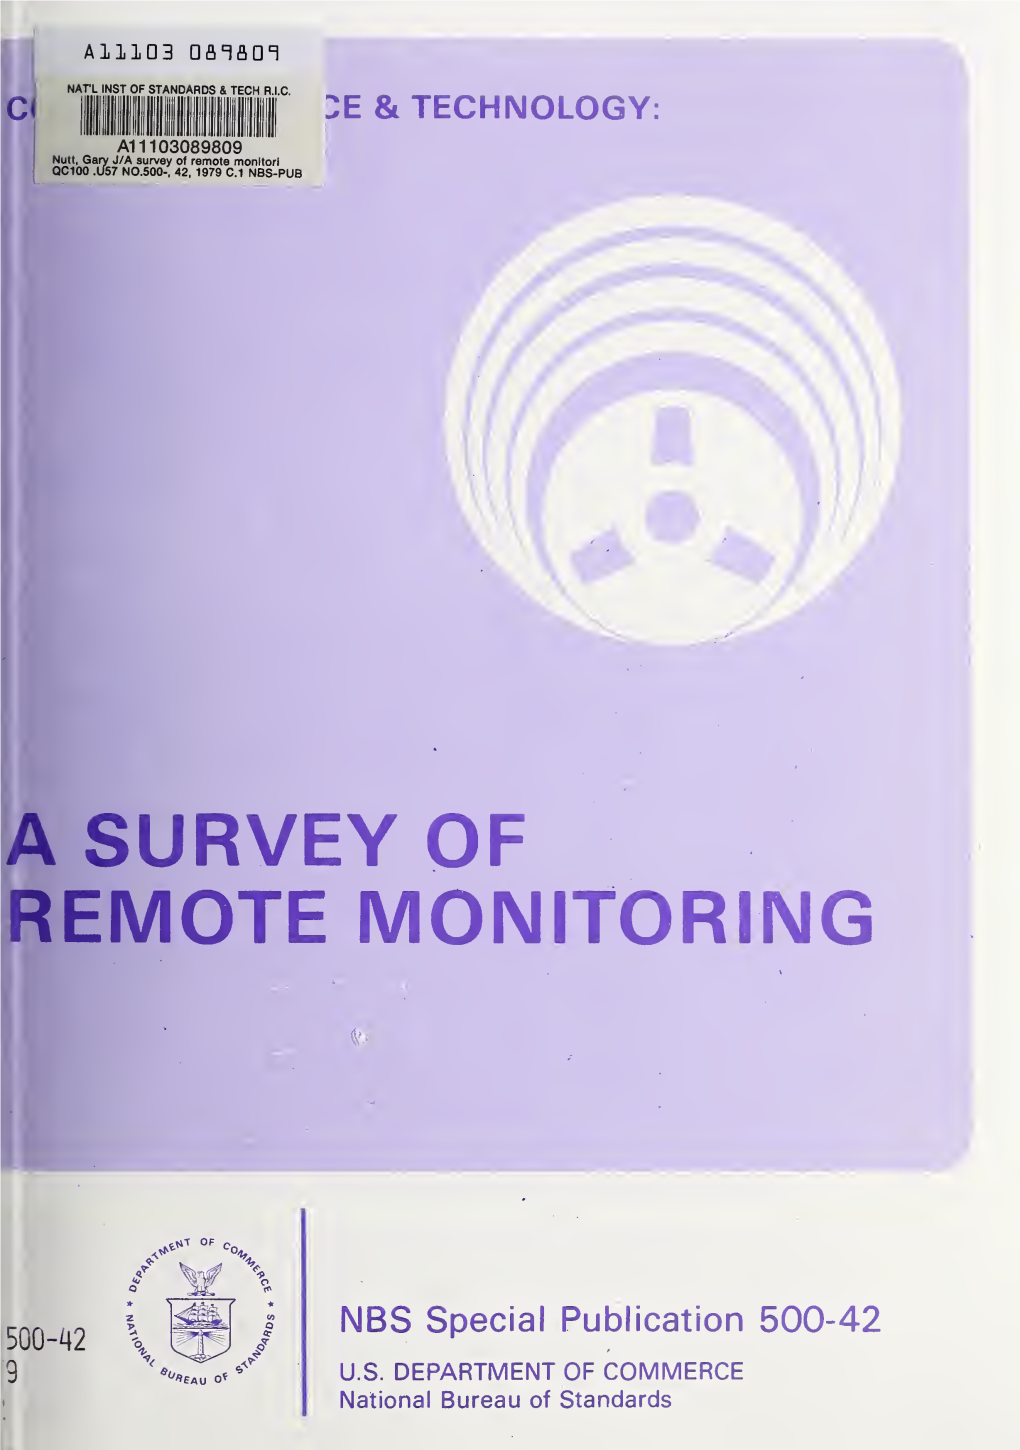 A Survey of Remote Monitoring